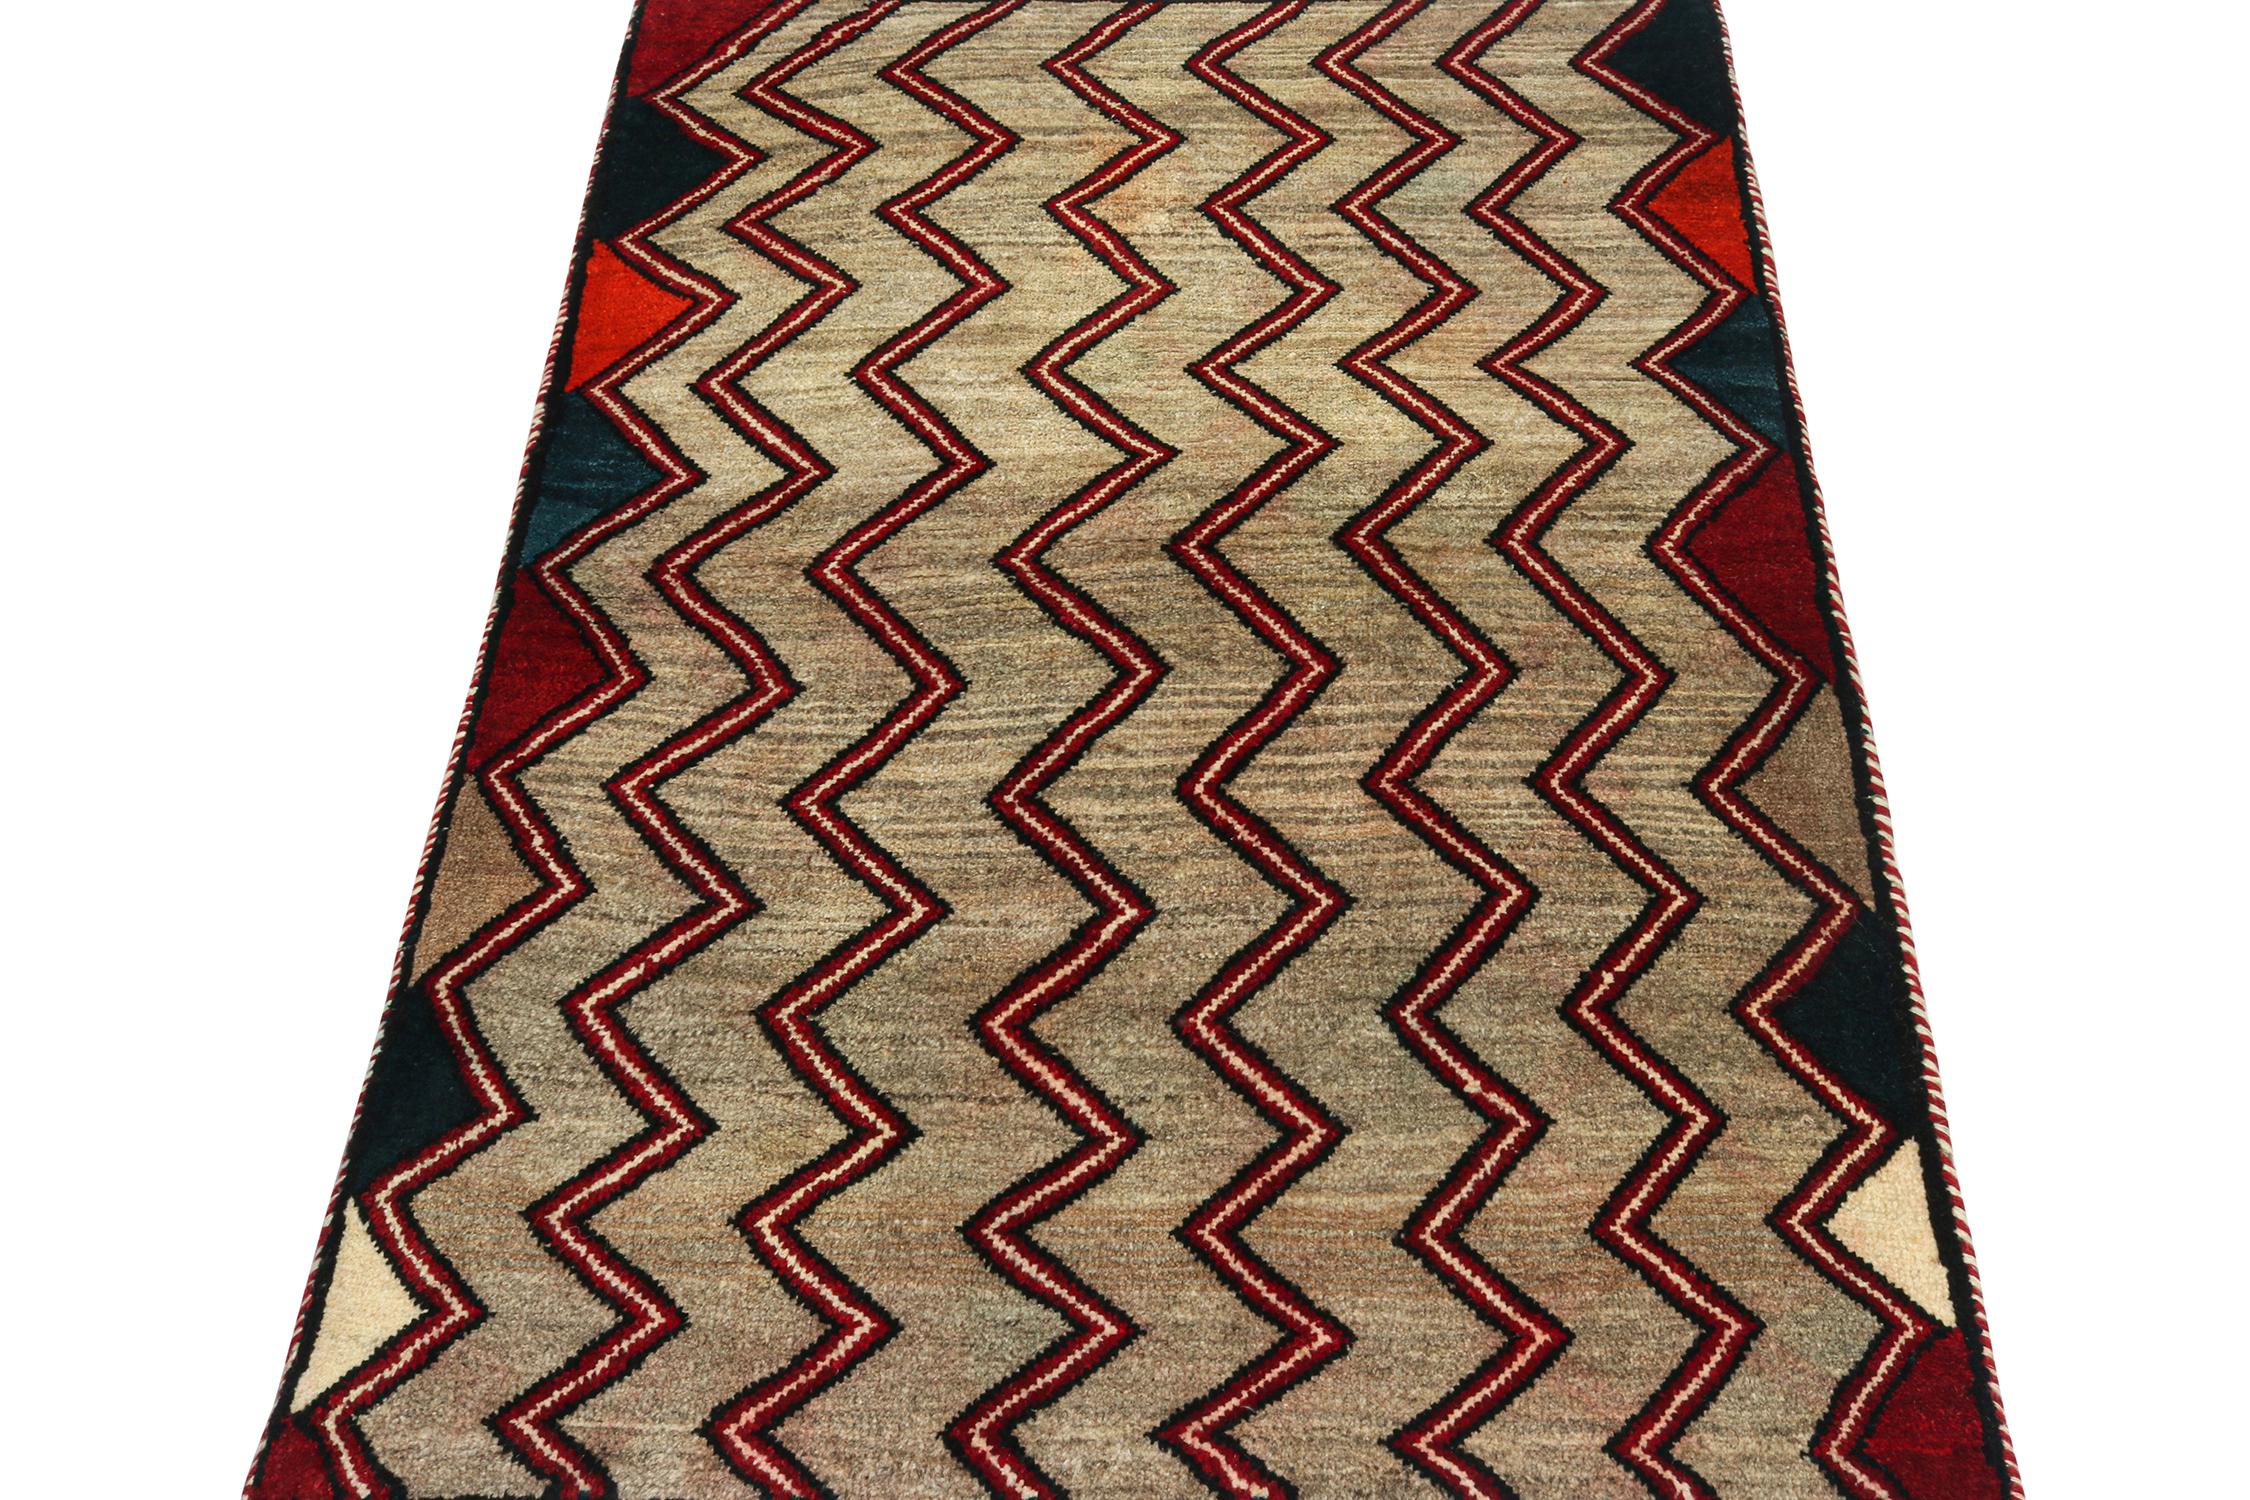 Turkish Vintage Gabbeh Tribal Rug in Beige-Brown and Red Chevron Patterns by Rug & Kilim For Sale